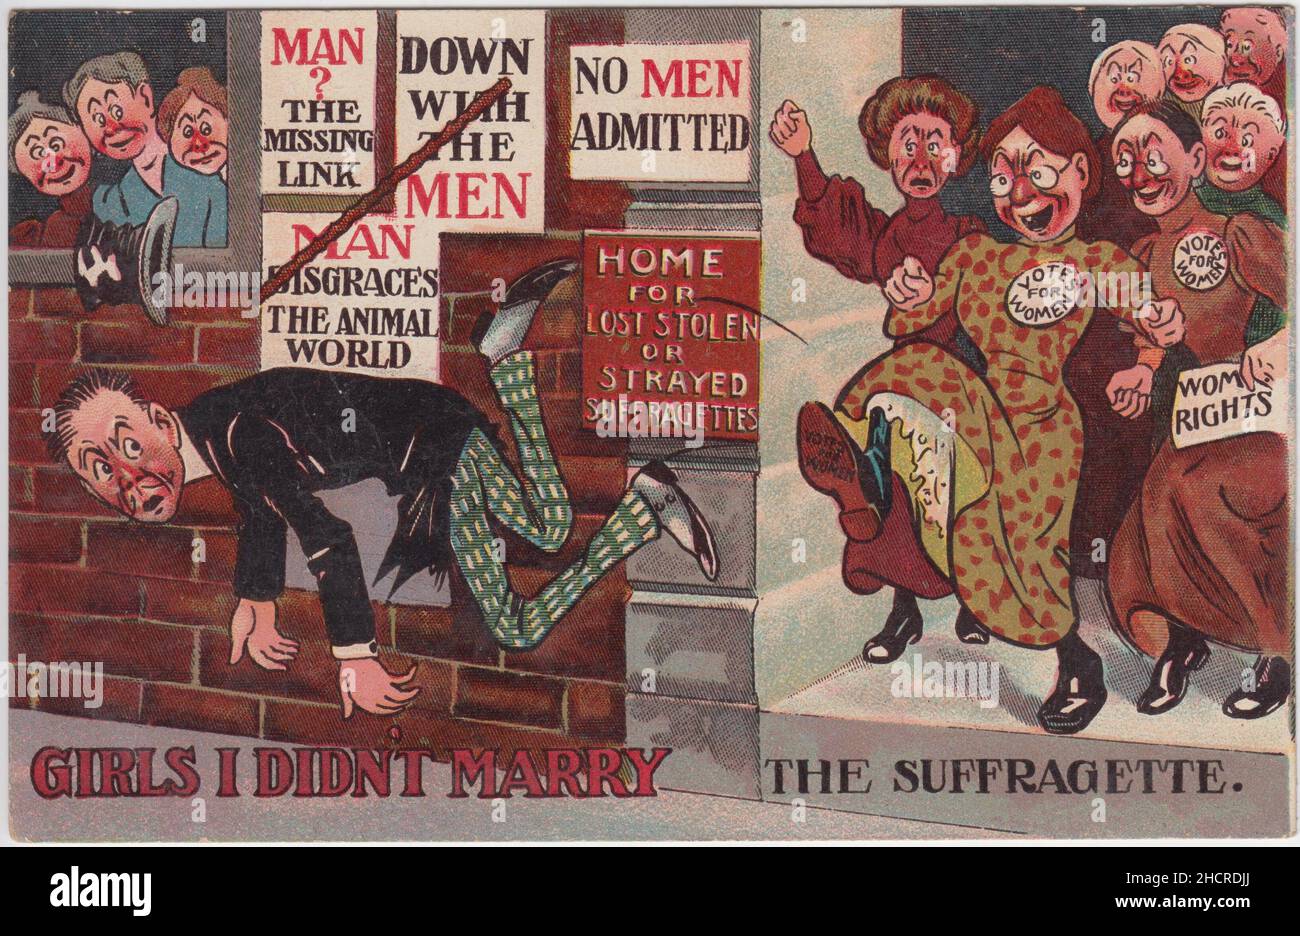 'Girls I didn't marry The Suffragette': cartoon showing a man wearing spats with a rather thin moustache being booted out of a 'Home for Lost Stolen or Strayed Suffragettes'. The women are portrayed as ugly, older women. Several have badges with 'Votes for Women' on (a caption which is also written on the sole of the boot which has connected with the rear end of the man) and one woman is carrying a paper captioned 'Women's rights'. Anti-men posters are pasted up on the wall with slogans 'Down with the men', 'No men admitted', 'Man disgraces the animal world' & 'Man? The missing link' Stock Photo